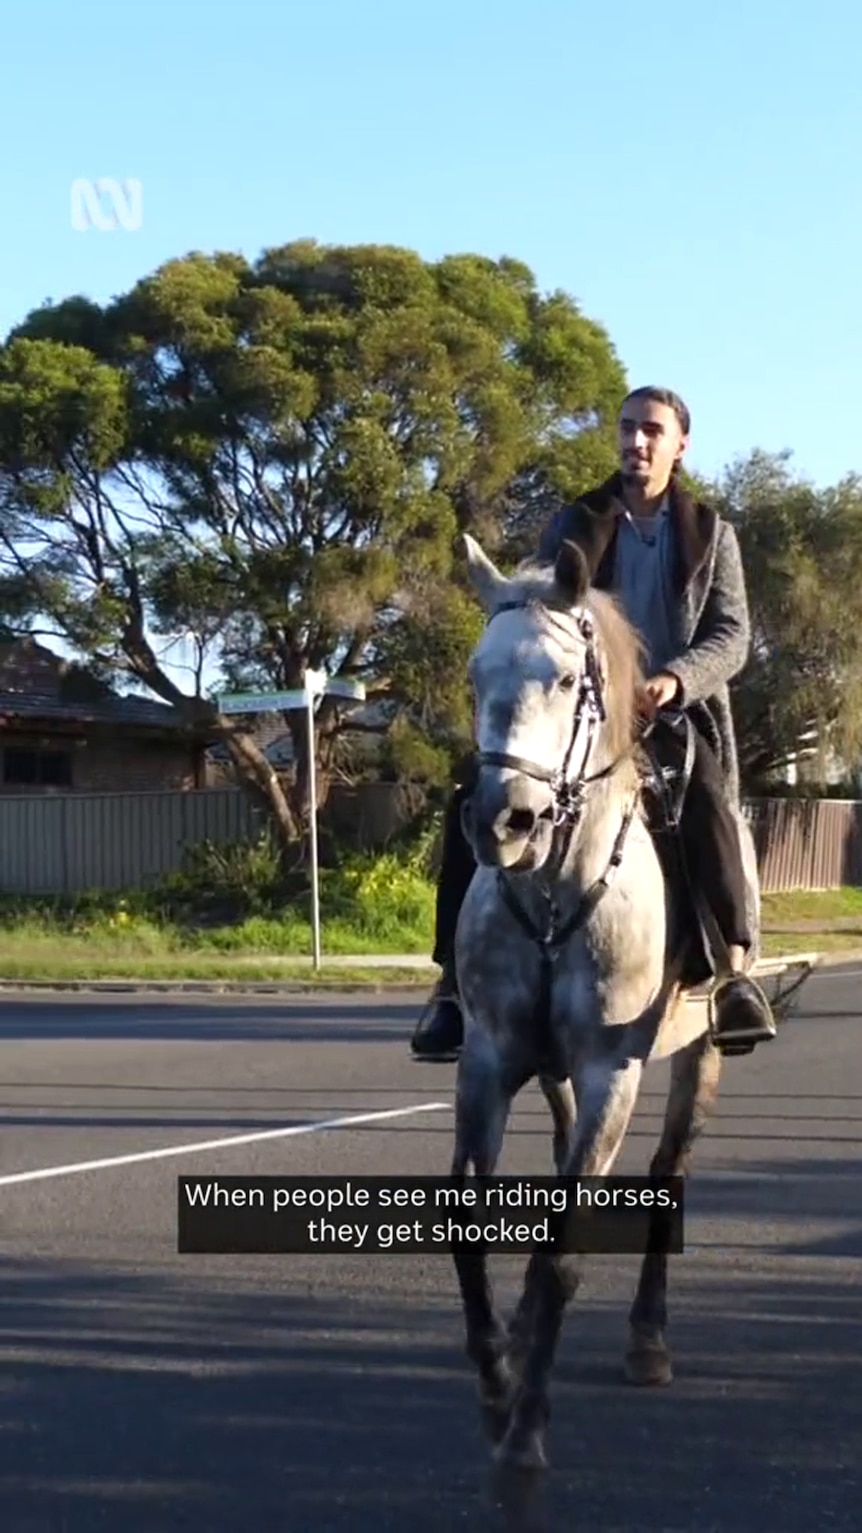 A young man with a dark beard and medium-tone skin rides a black and white horse on a suburban street.